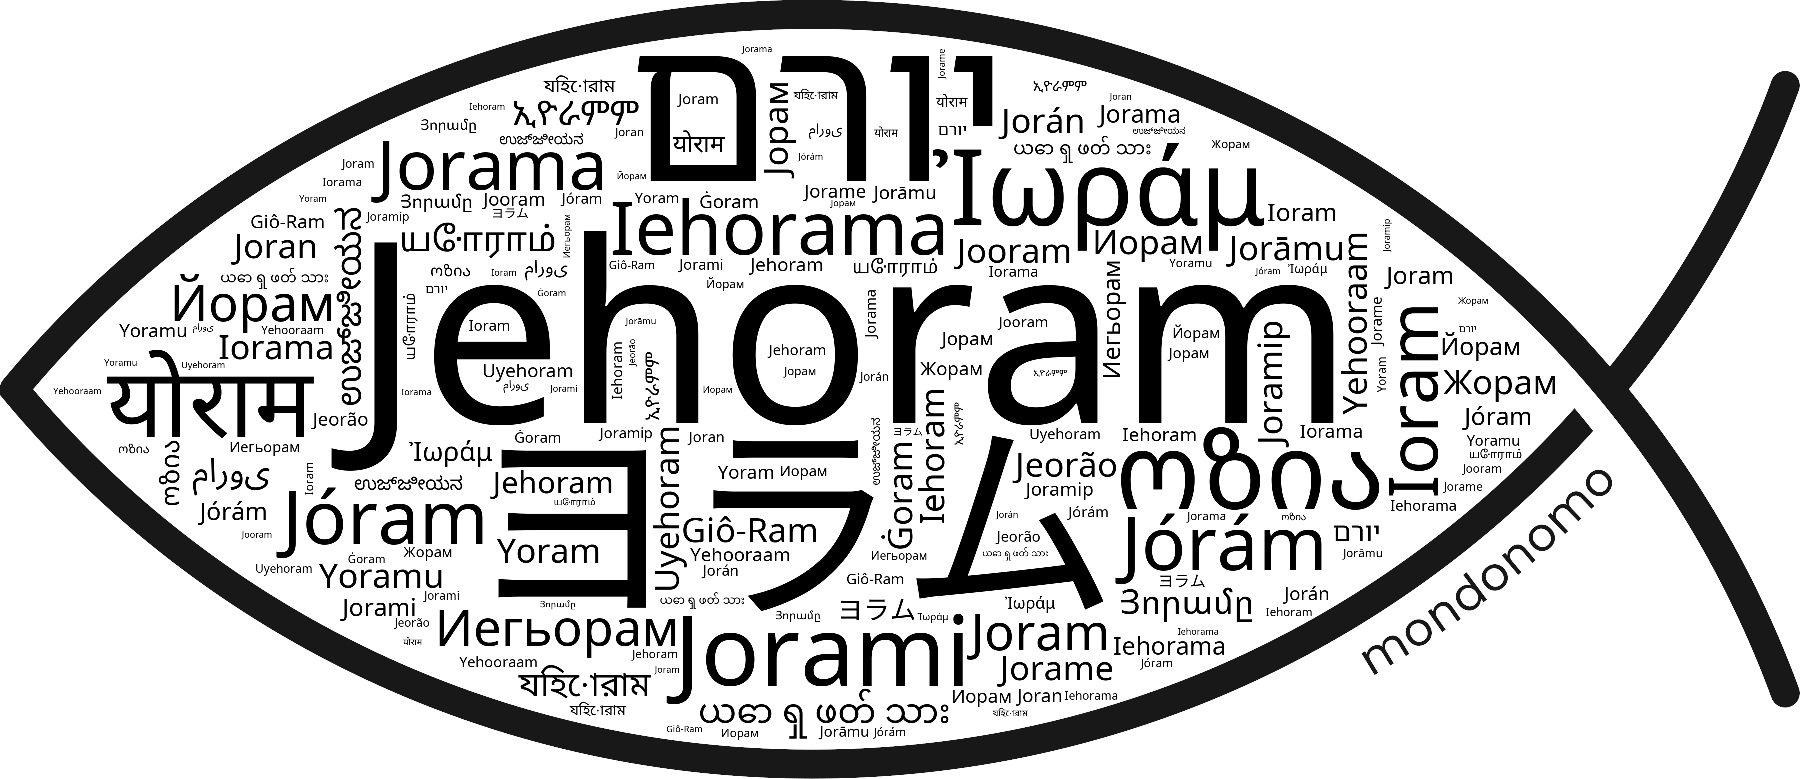 Name Jehoram in the world's Bibles